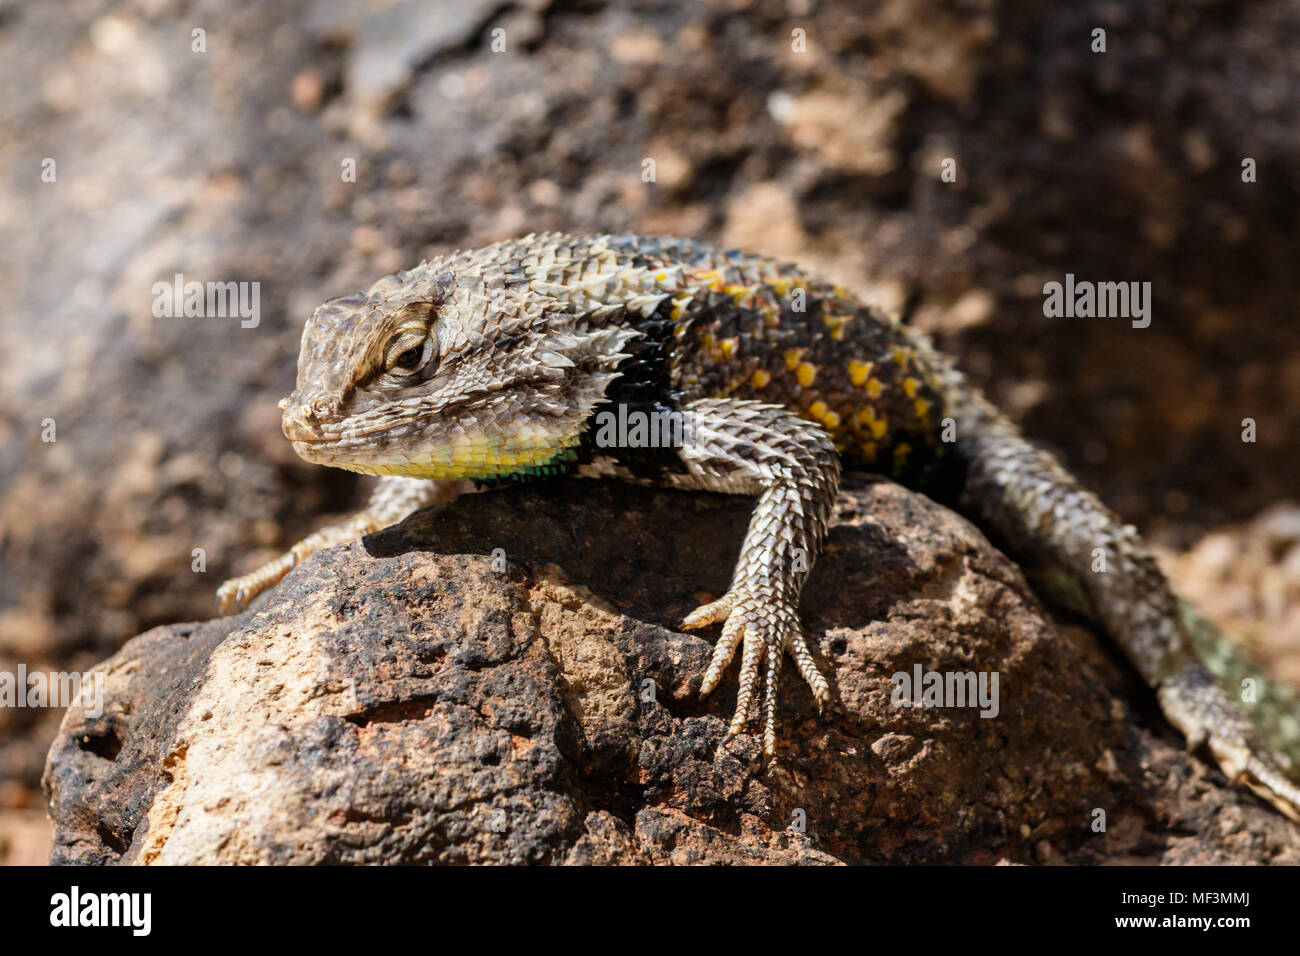 Desert Spiny Lizard sunning on a dark colored rock, with brightly colored scales, In Arizona's Sonoran desert. Stock Photo